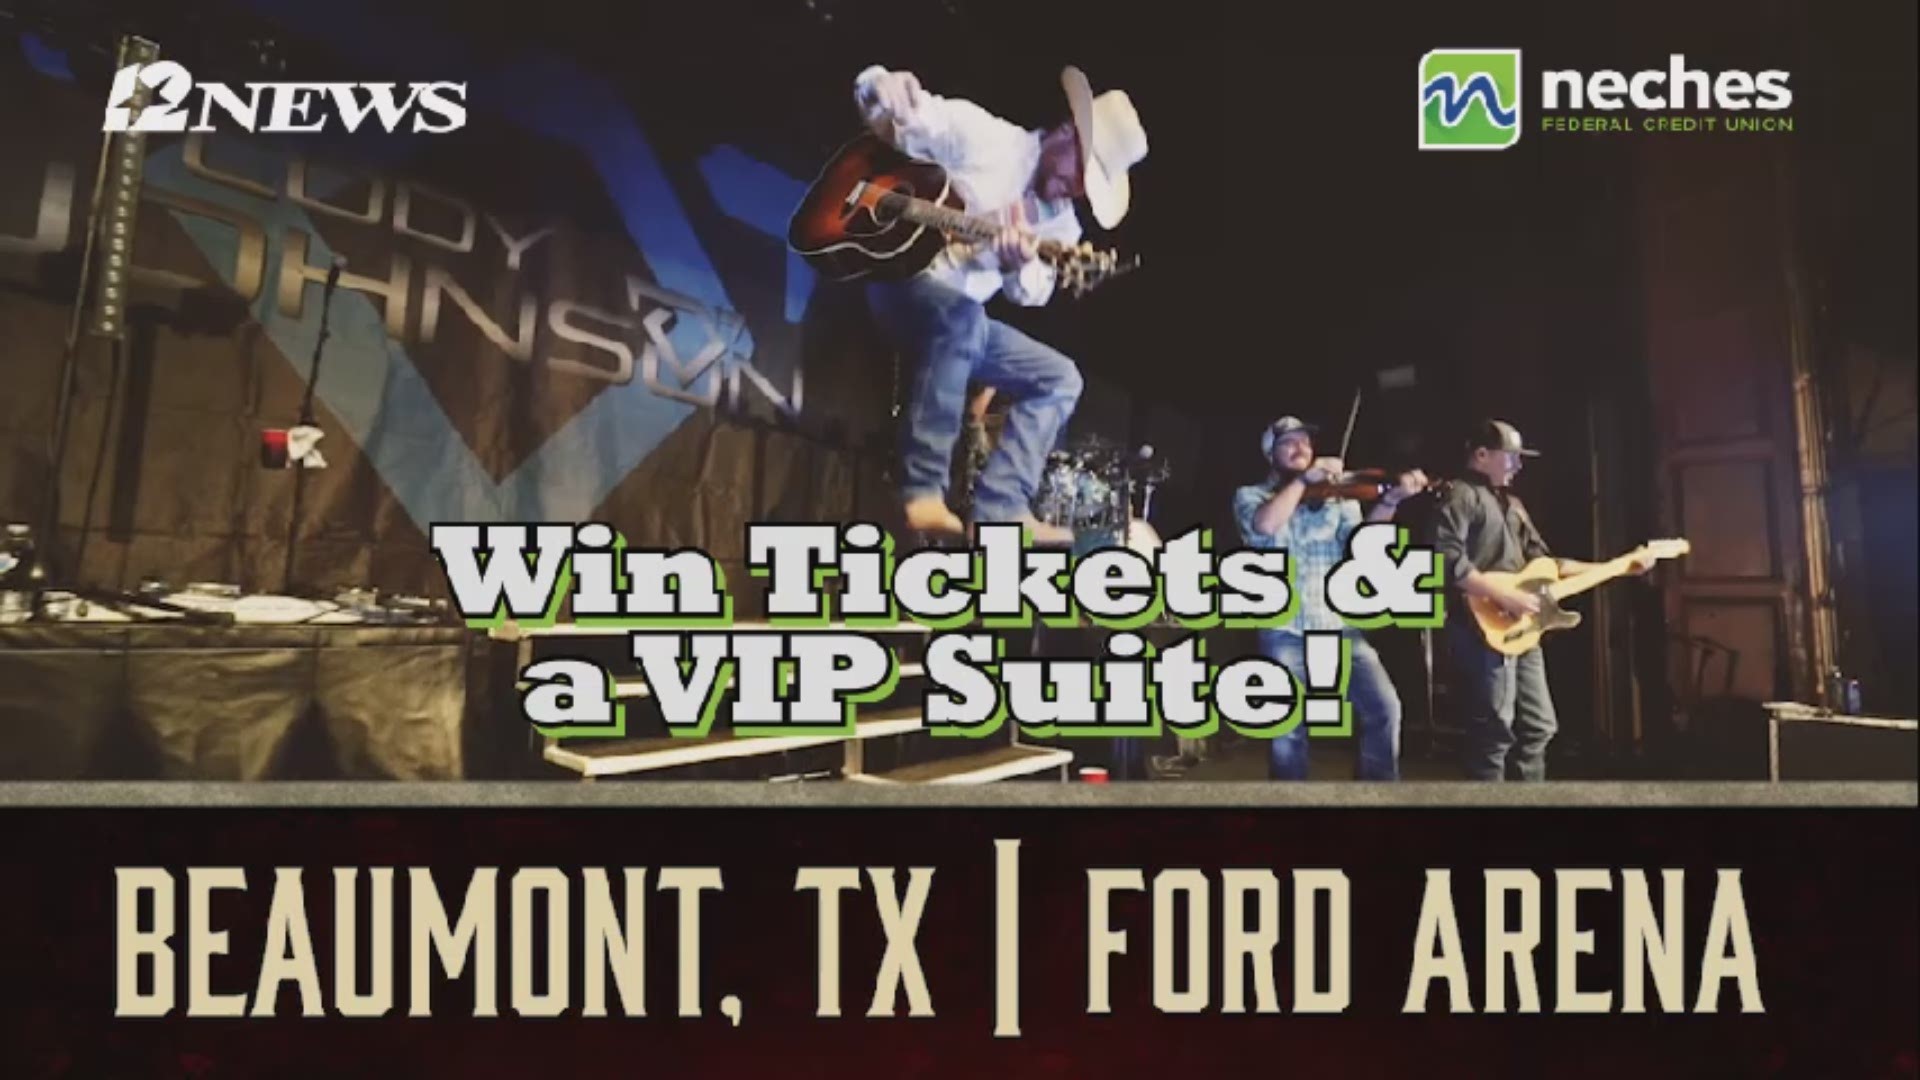 One lucky winner and three of their friends will be going to see Cody Johnson at Ford Arena on November 30, 2019.